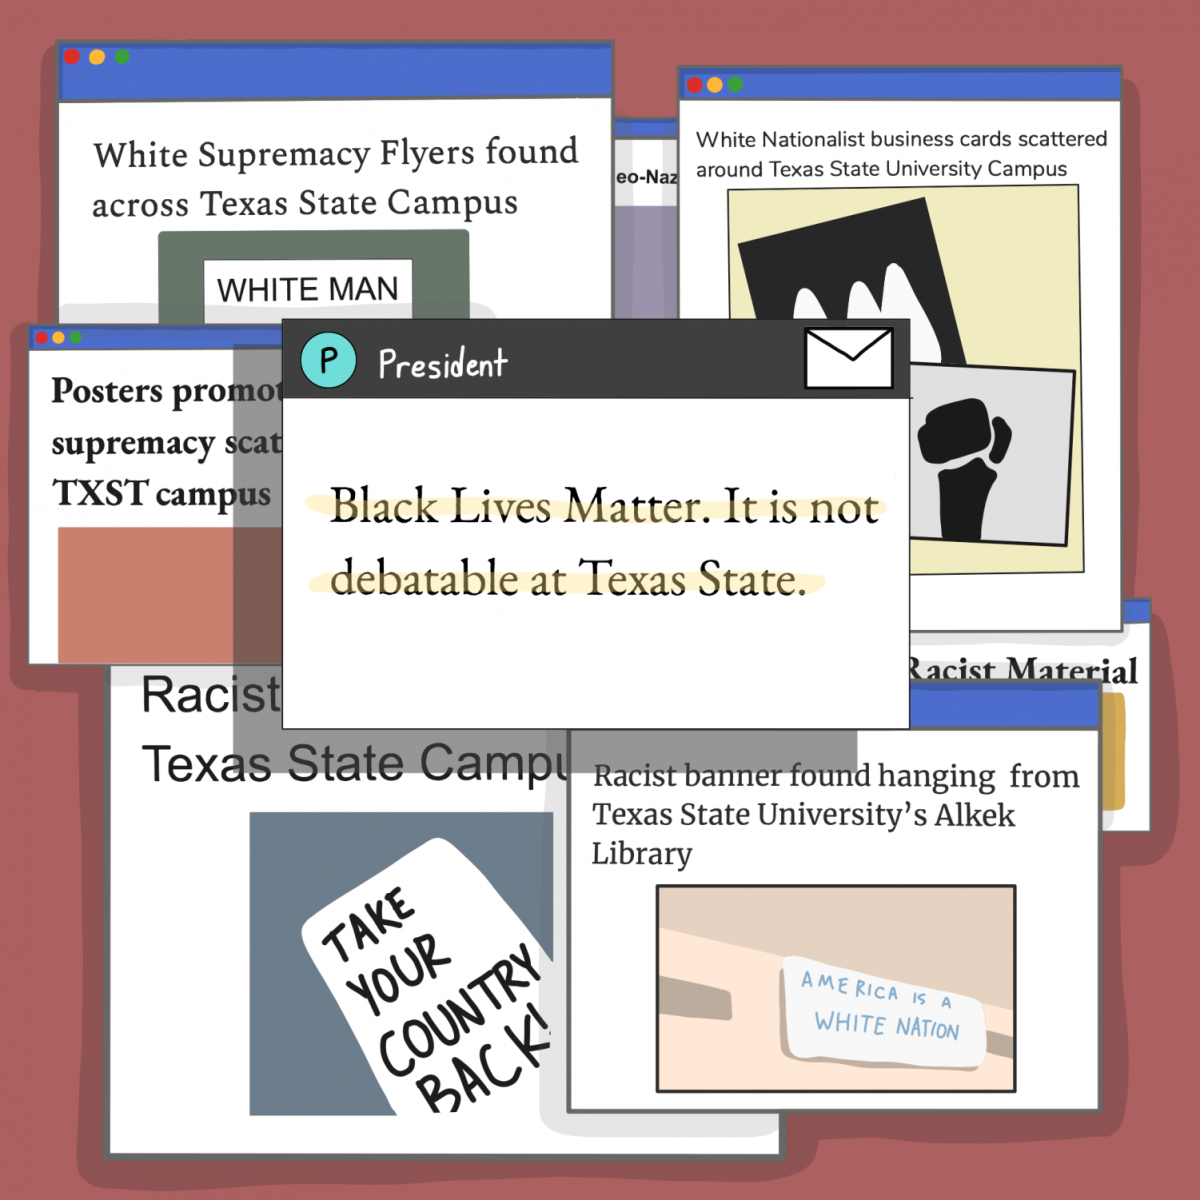 An illustration of several open computer windows. Each window displays headlines about incidents involving white supremacists on the Texas State campus except for one that depicts an email from President Trauth about the Black Lives Matter movement